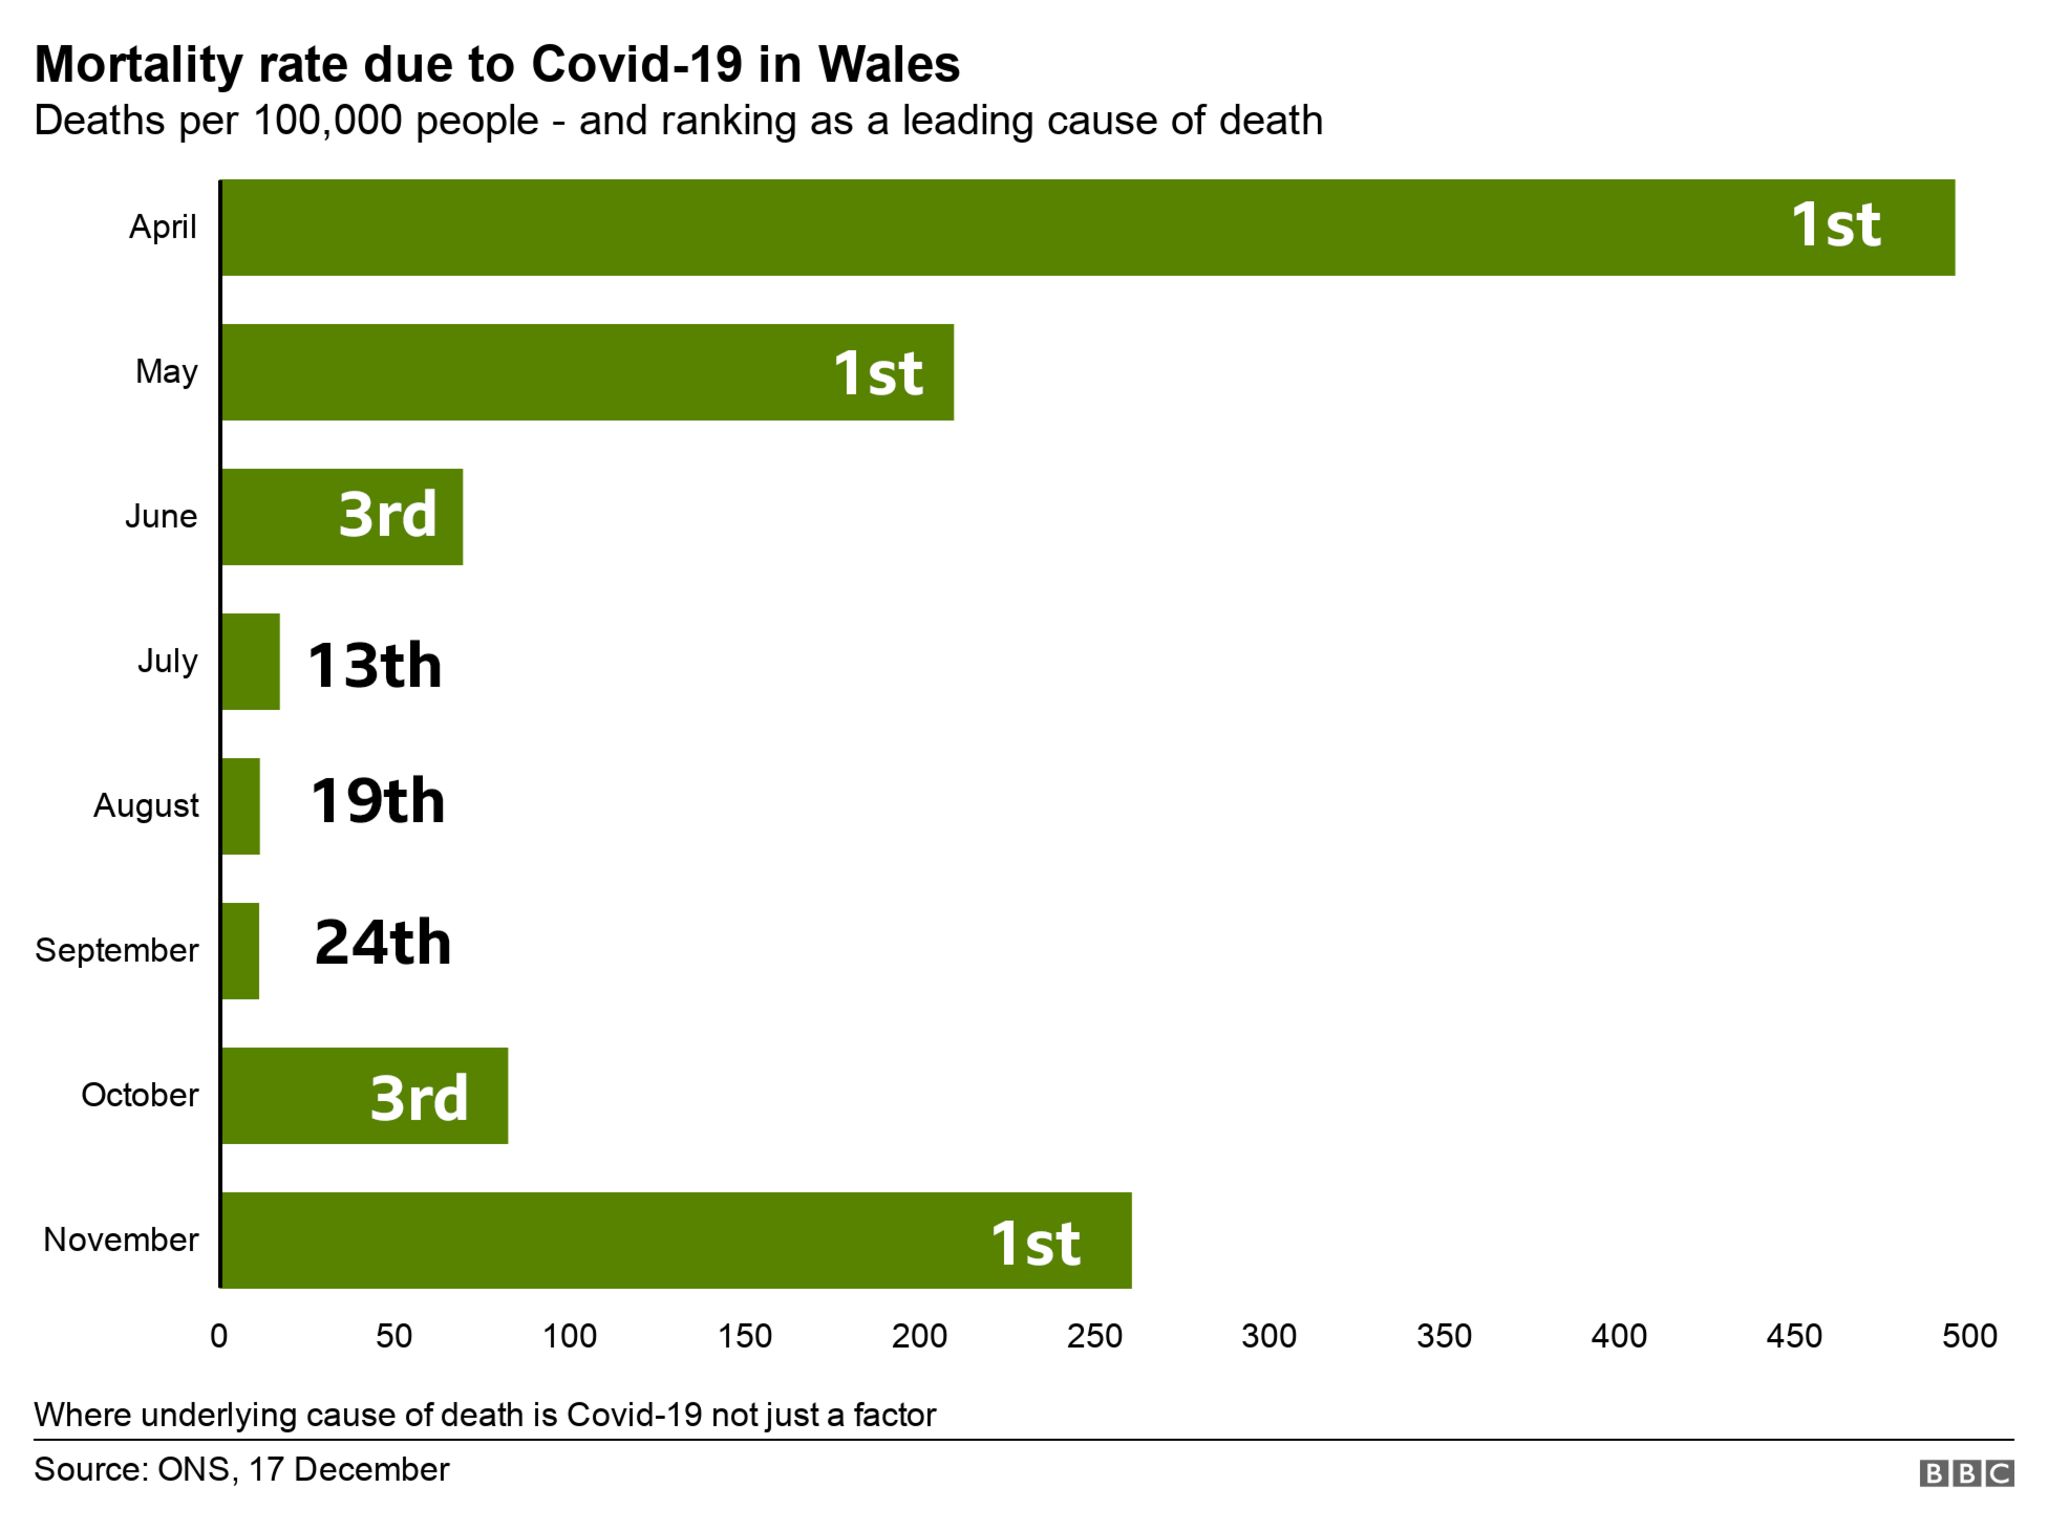 Covid19 leading cause of death in Wales again BBC News